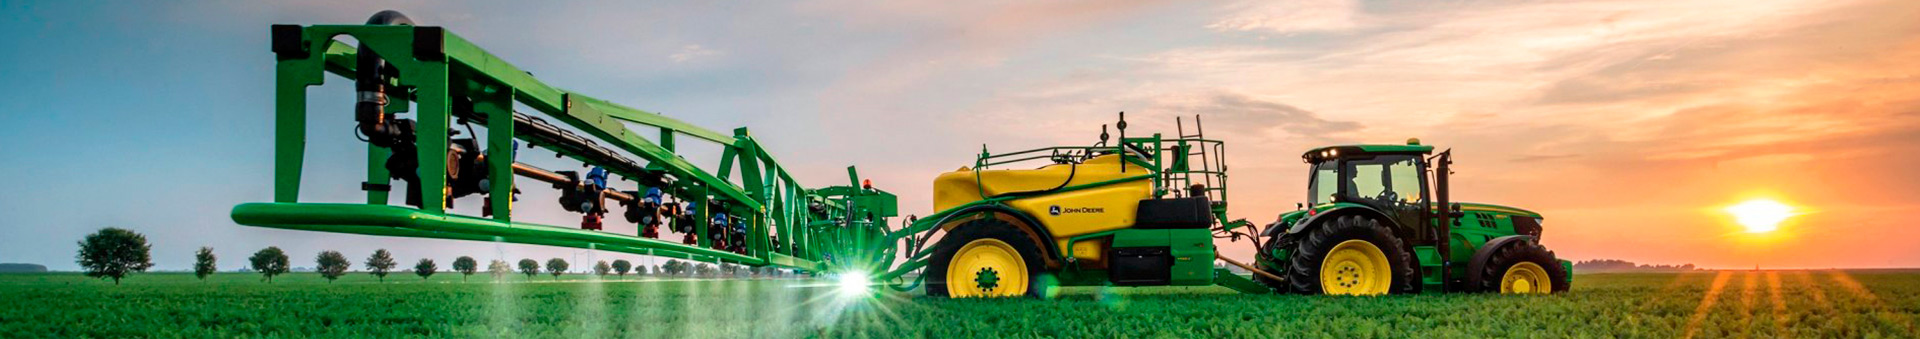 How to control the operation of agricultural machinery using GPS?